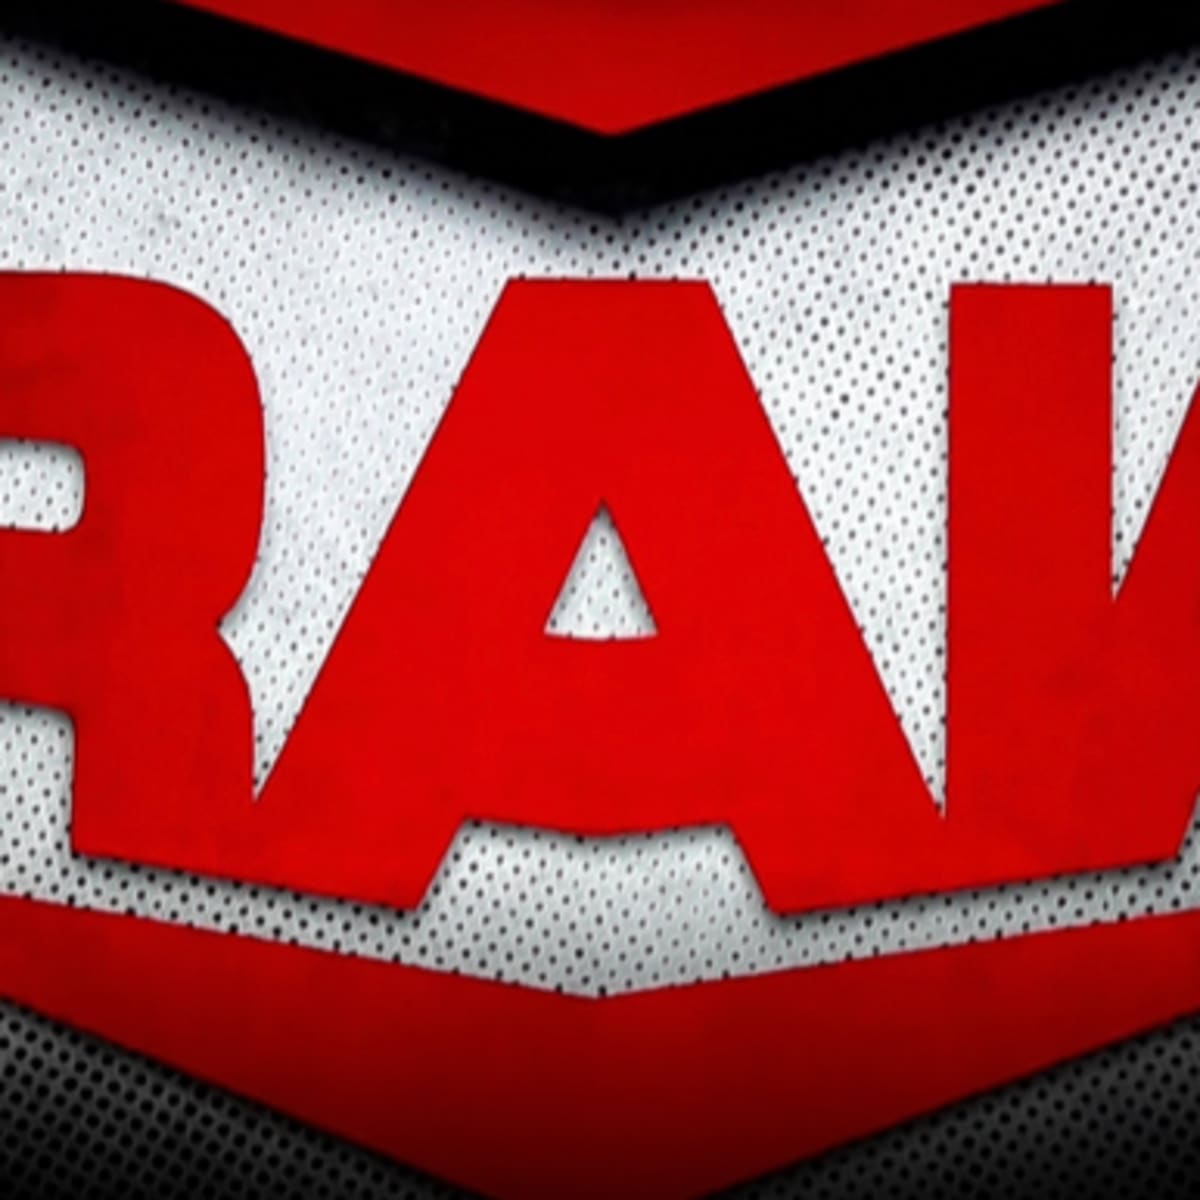 Fantasy Booking Each Of The Monday Night Raw Titles Post Summerslam Wwe Wrestling News World